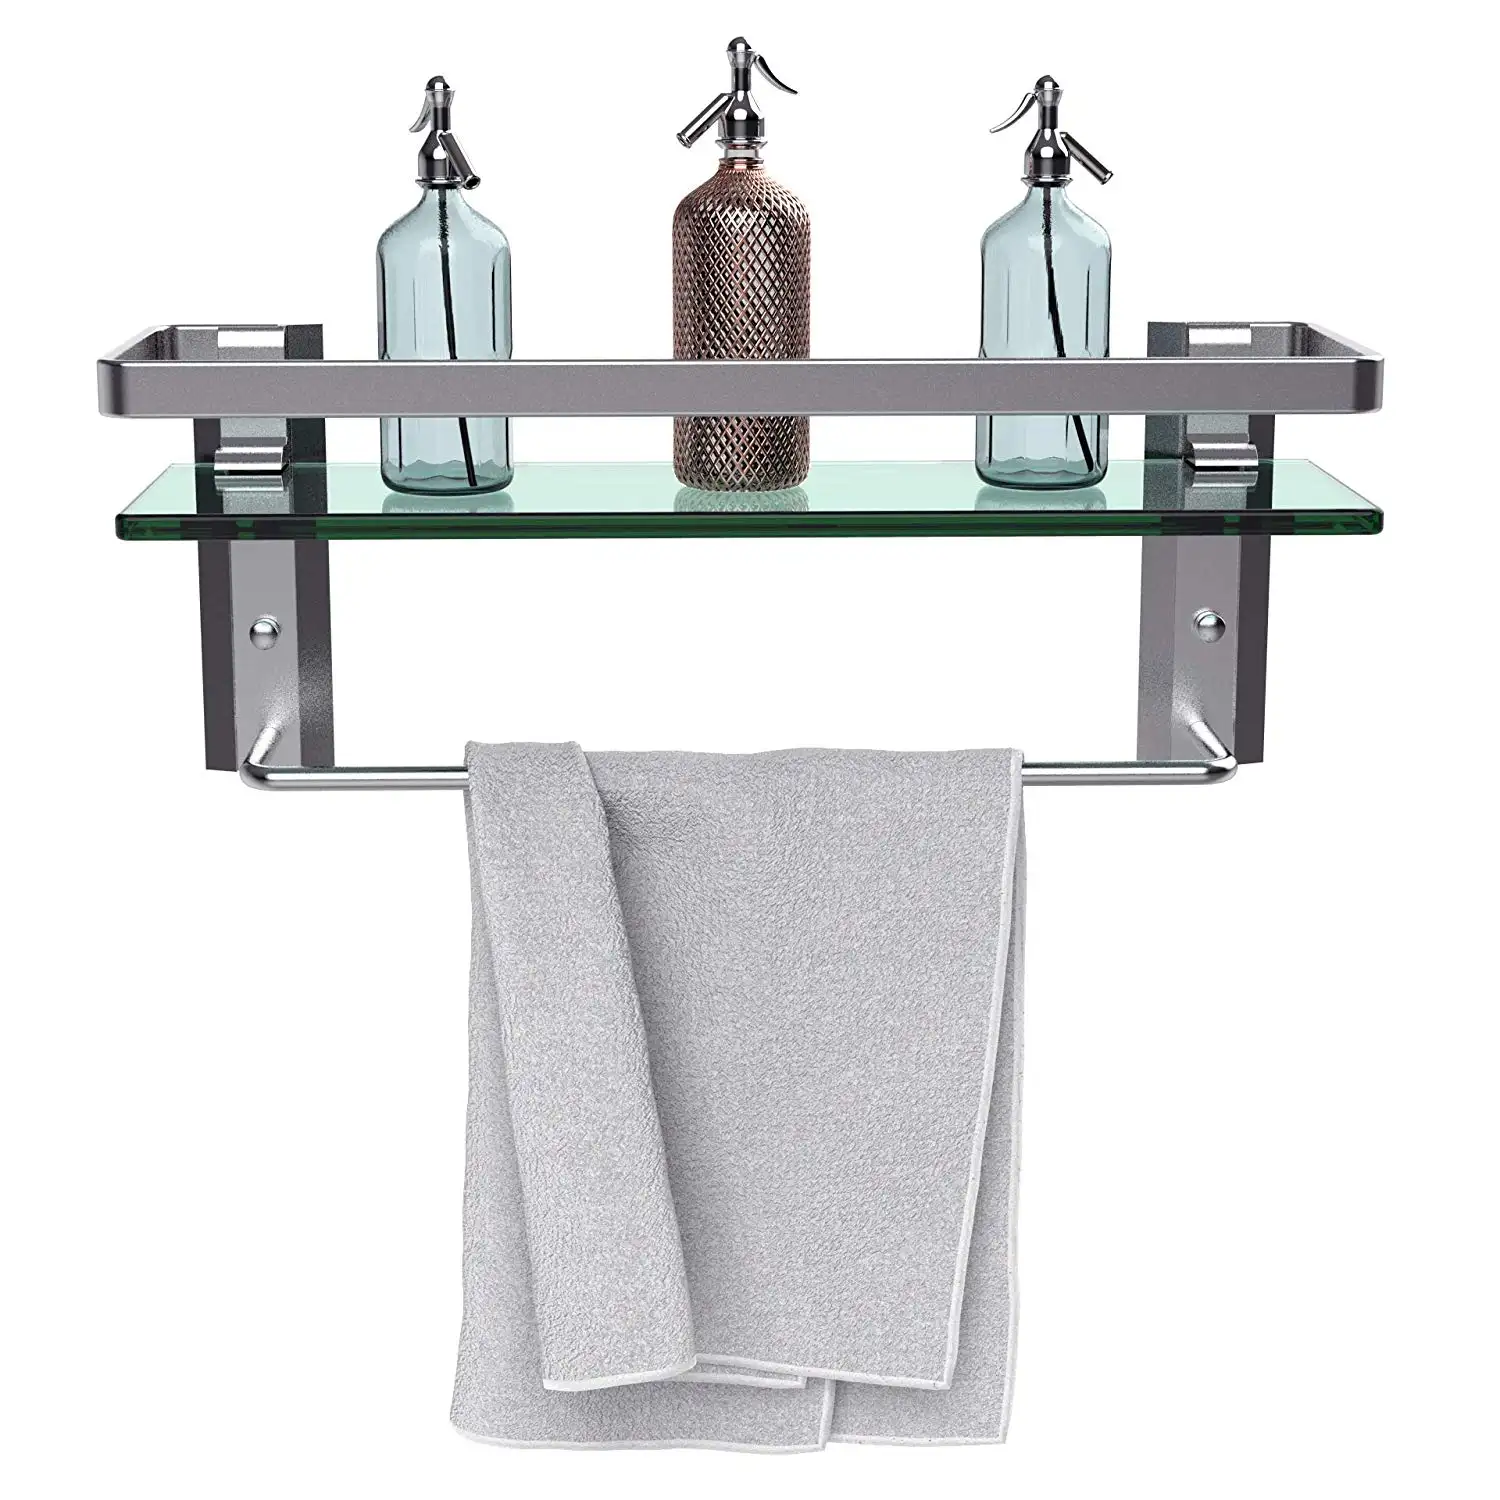 Aluminum Wall Mounted Glass Shower Shelf With Towel Bar Glass Bath Shelf Bathroom Glass Shelf